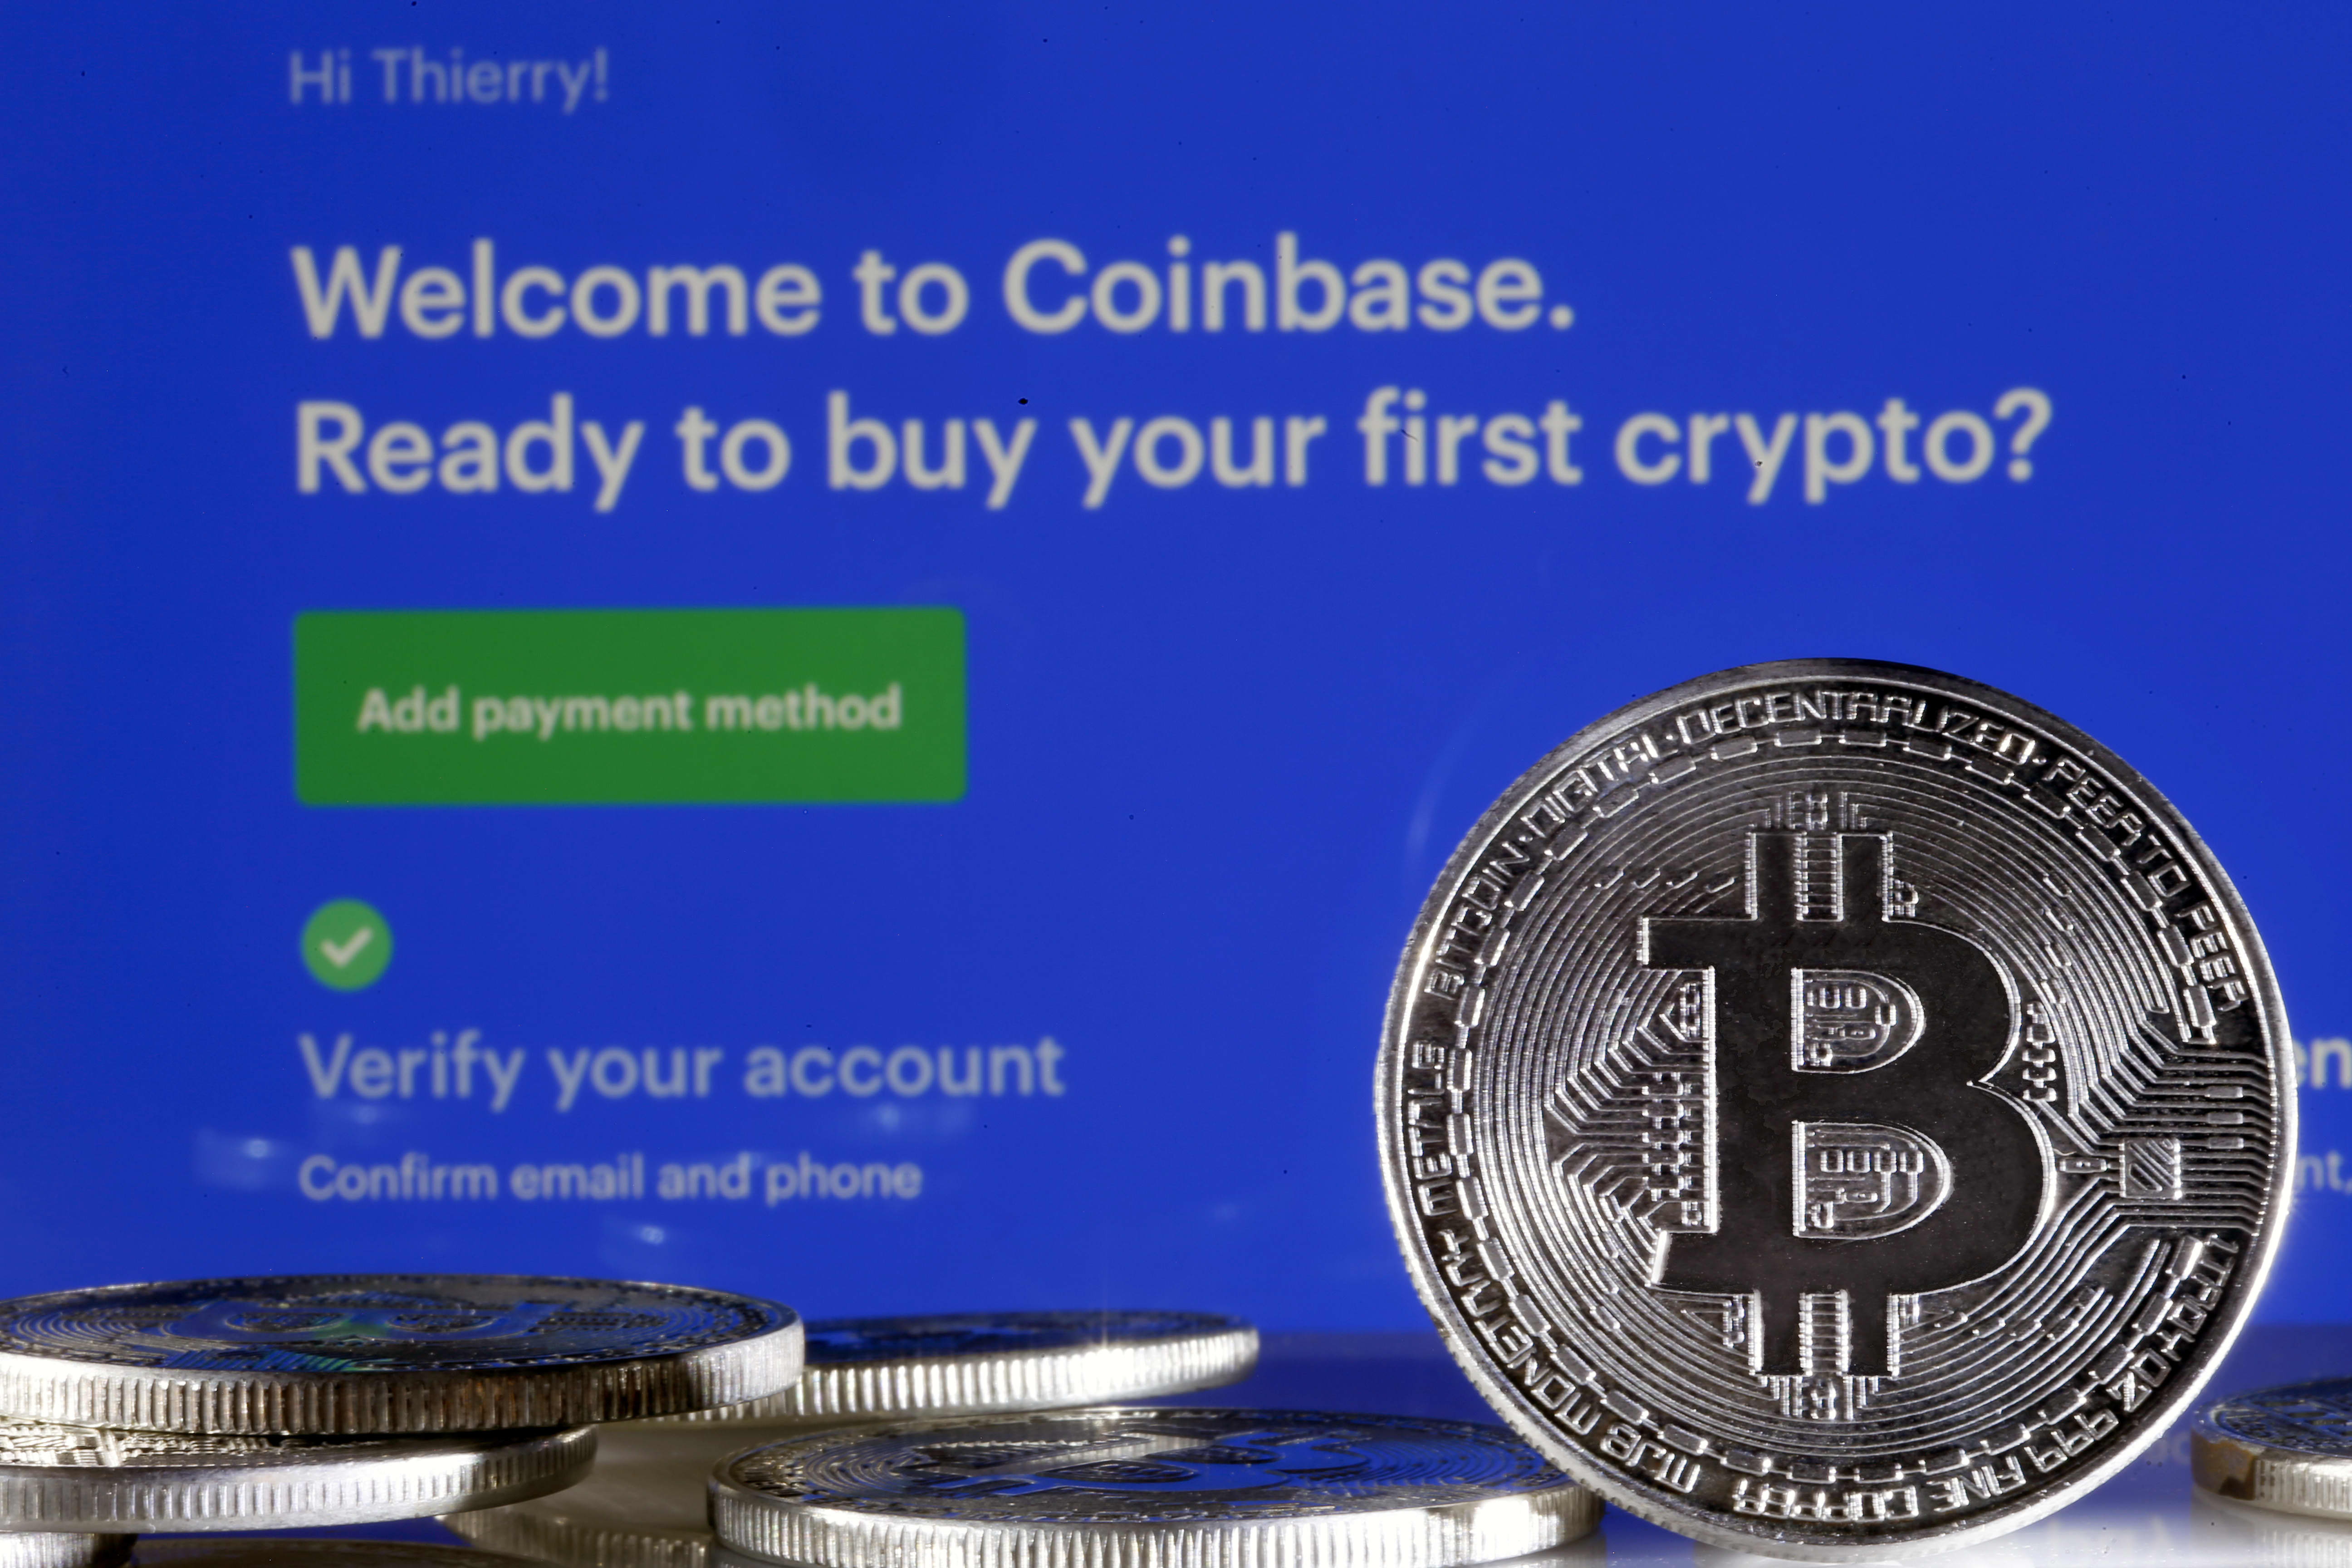 Coinbase Just Debuted the First Bitcoin Debit Card in the US